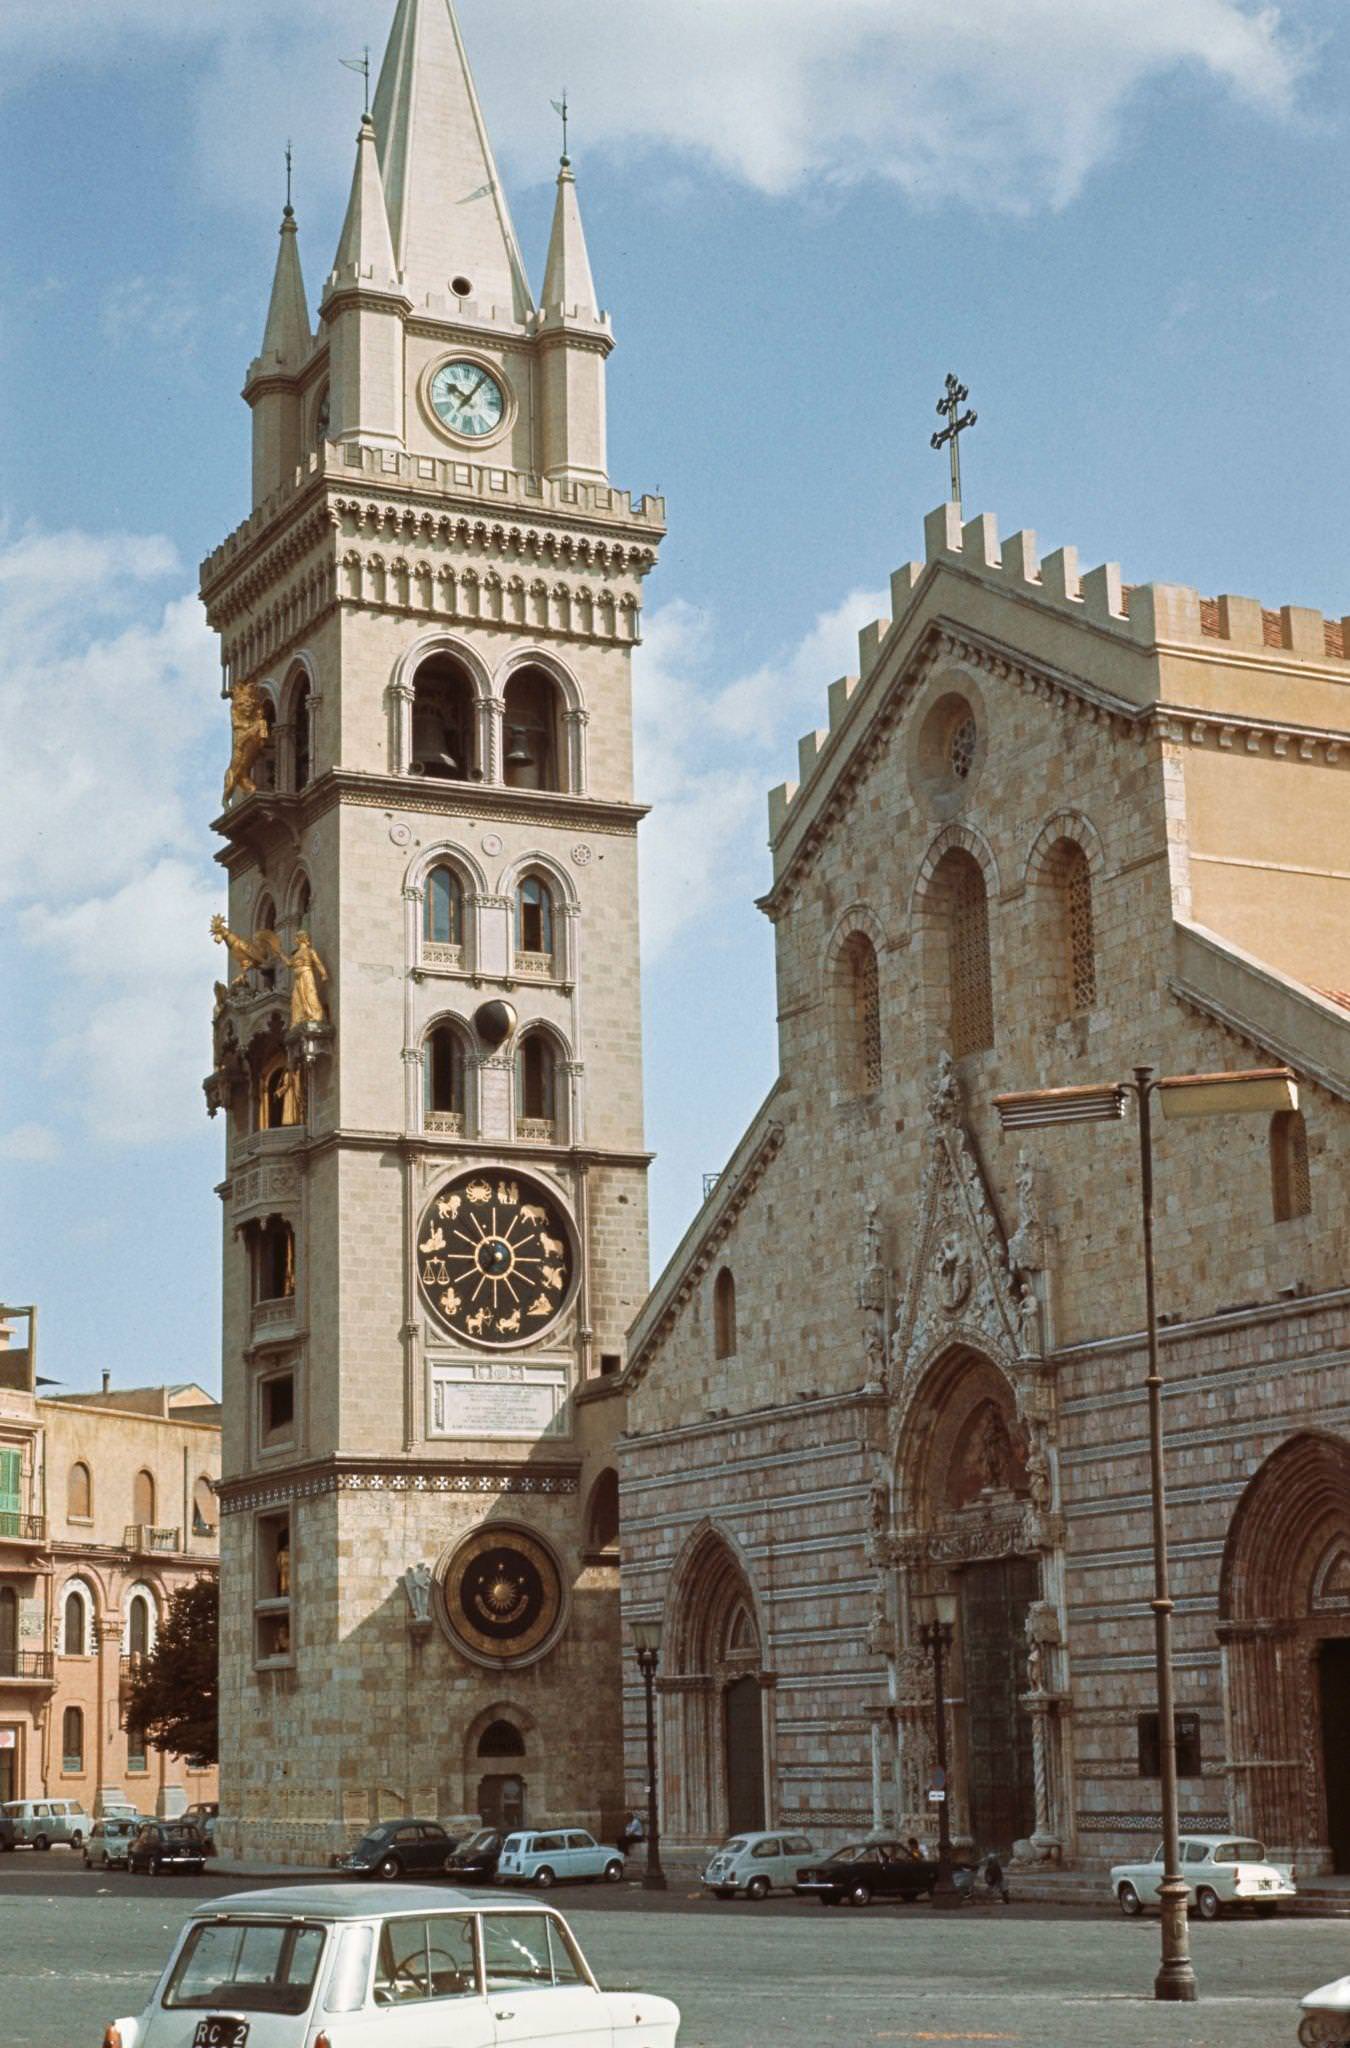 Messina Cathedral and parked cars on Piazza del Duomo in Messina, Sicily, circa 1970.